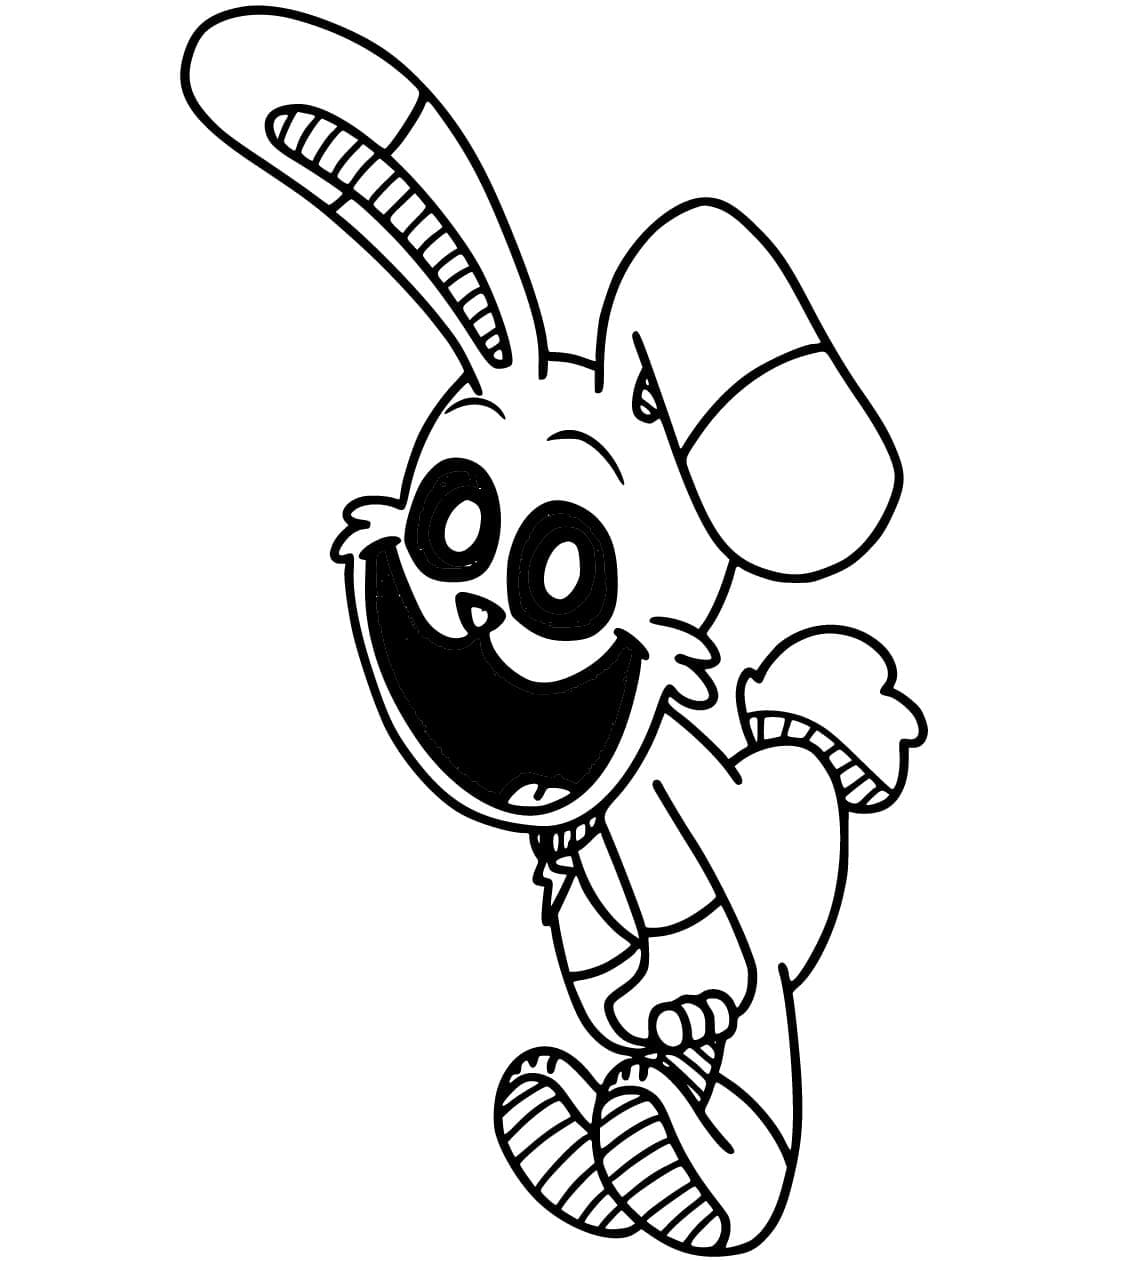 Hoppy Hopscotch Smiling Critters coloring page